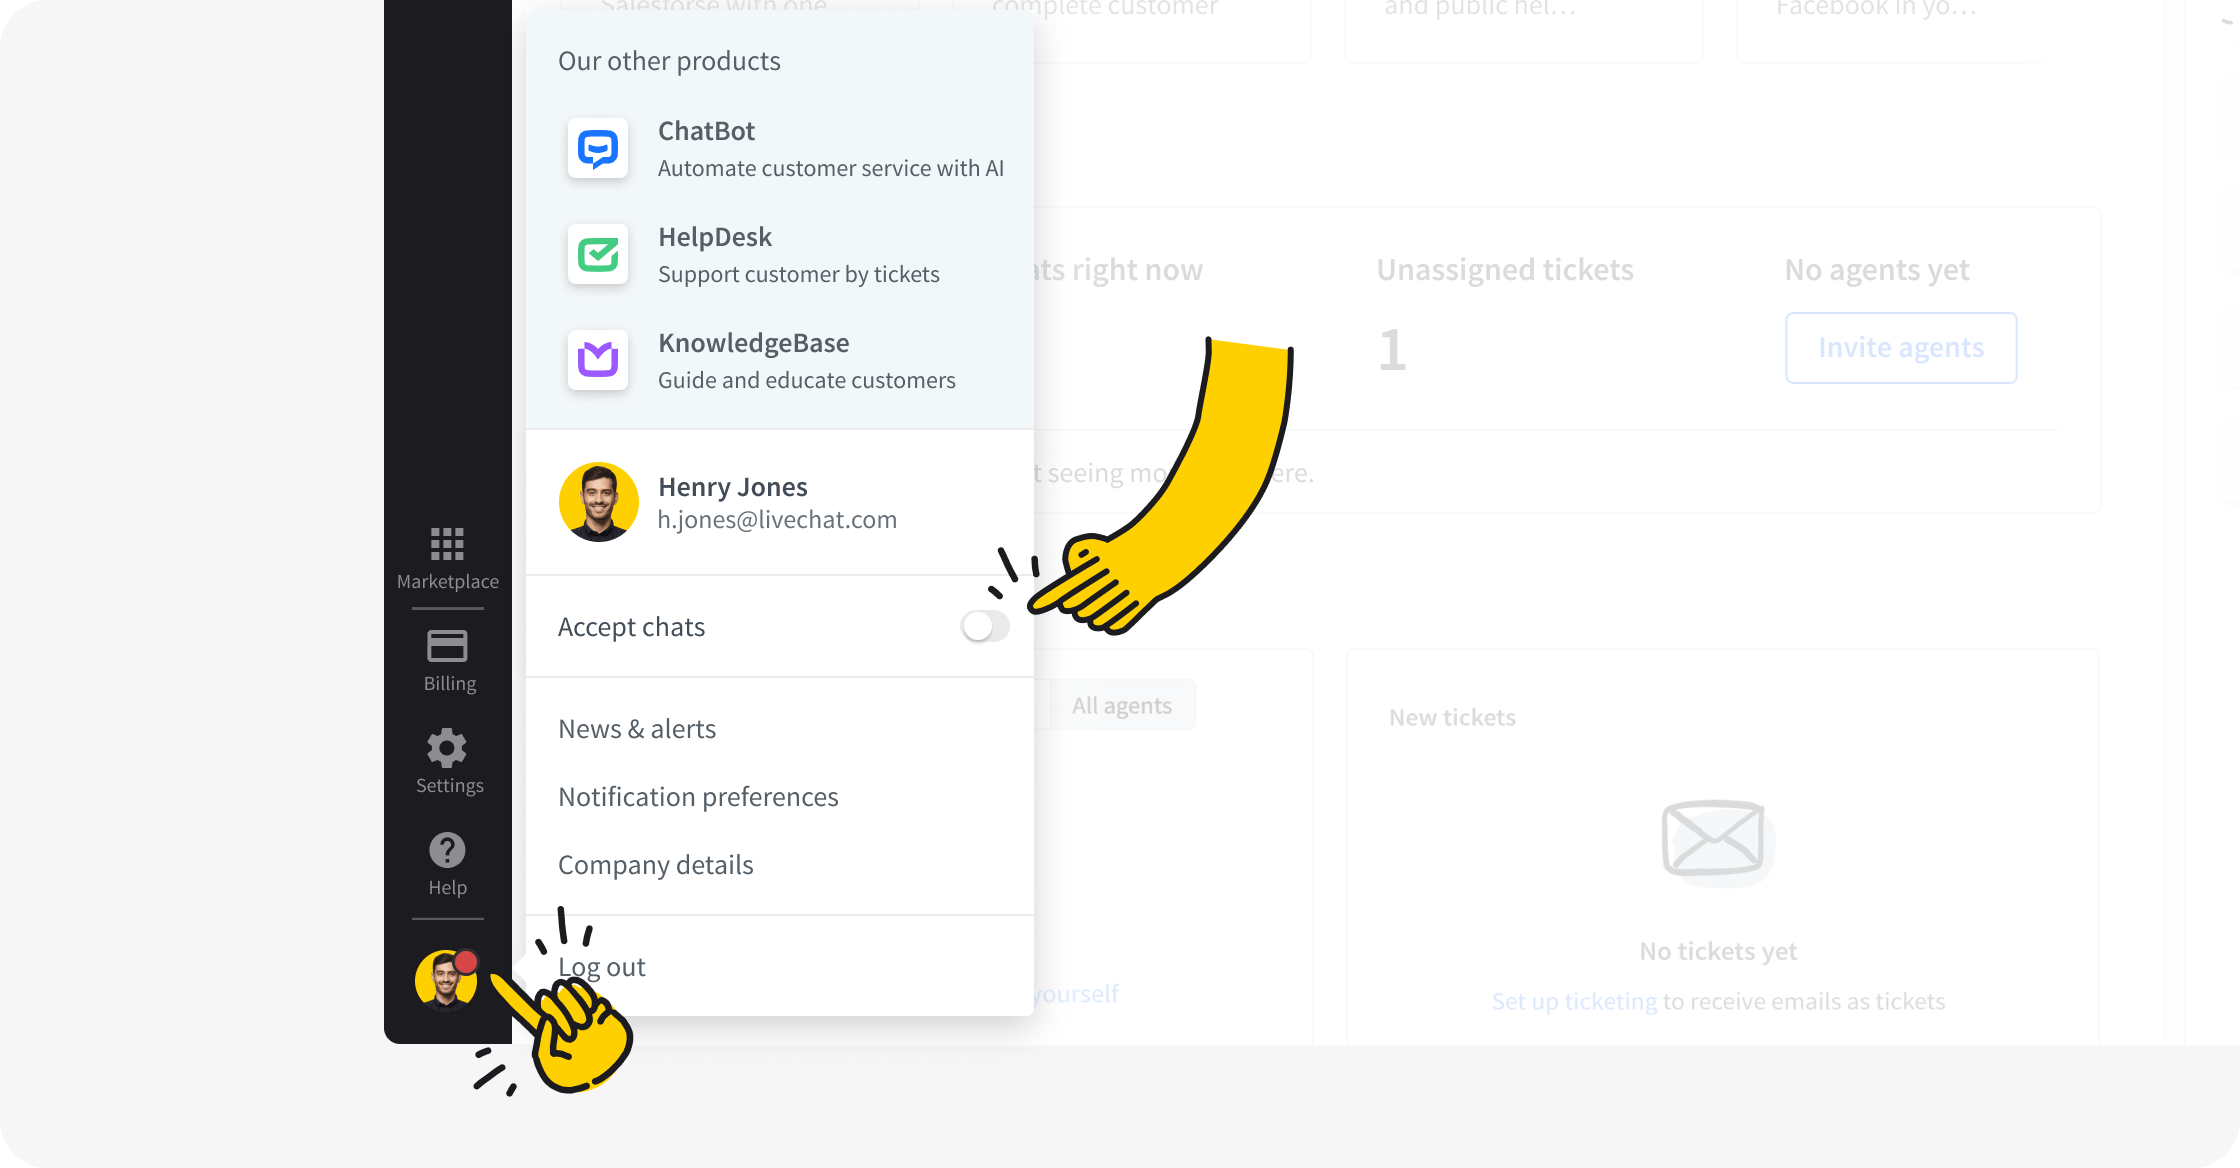 Off accepting chats in LiveChat app